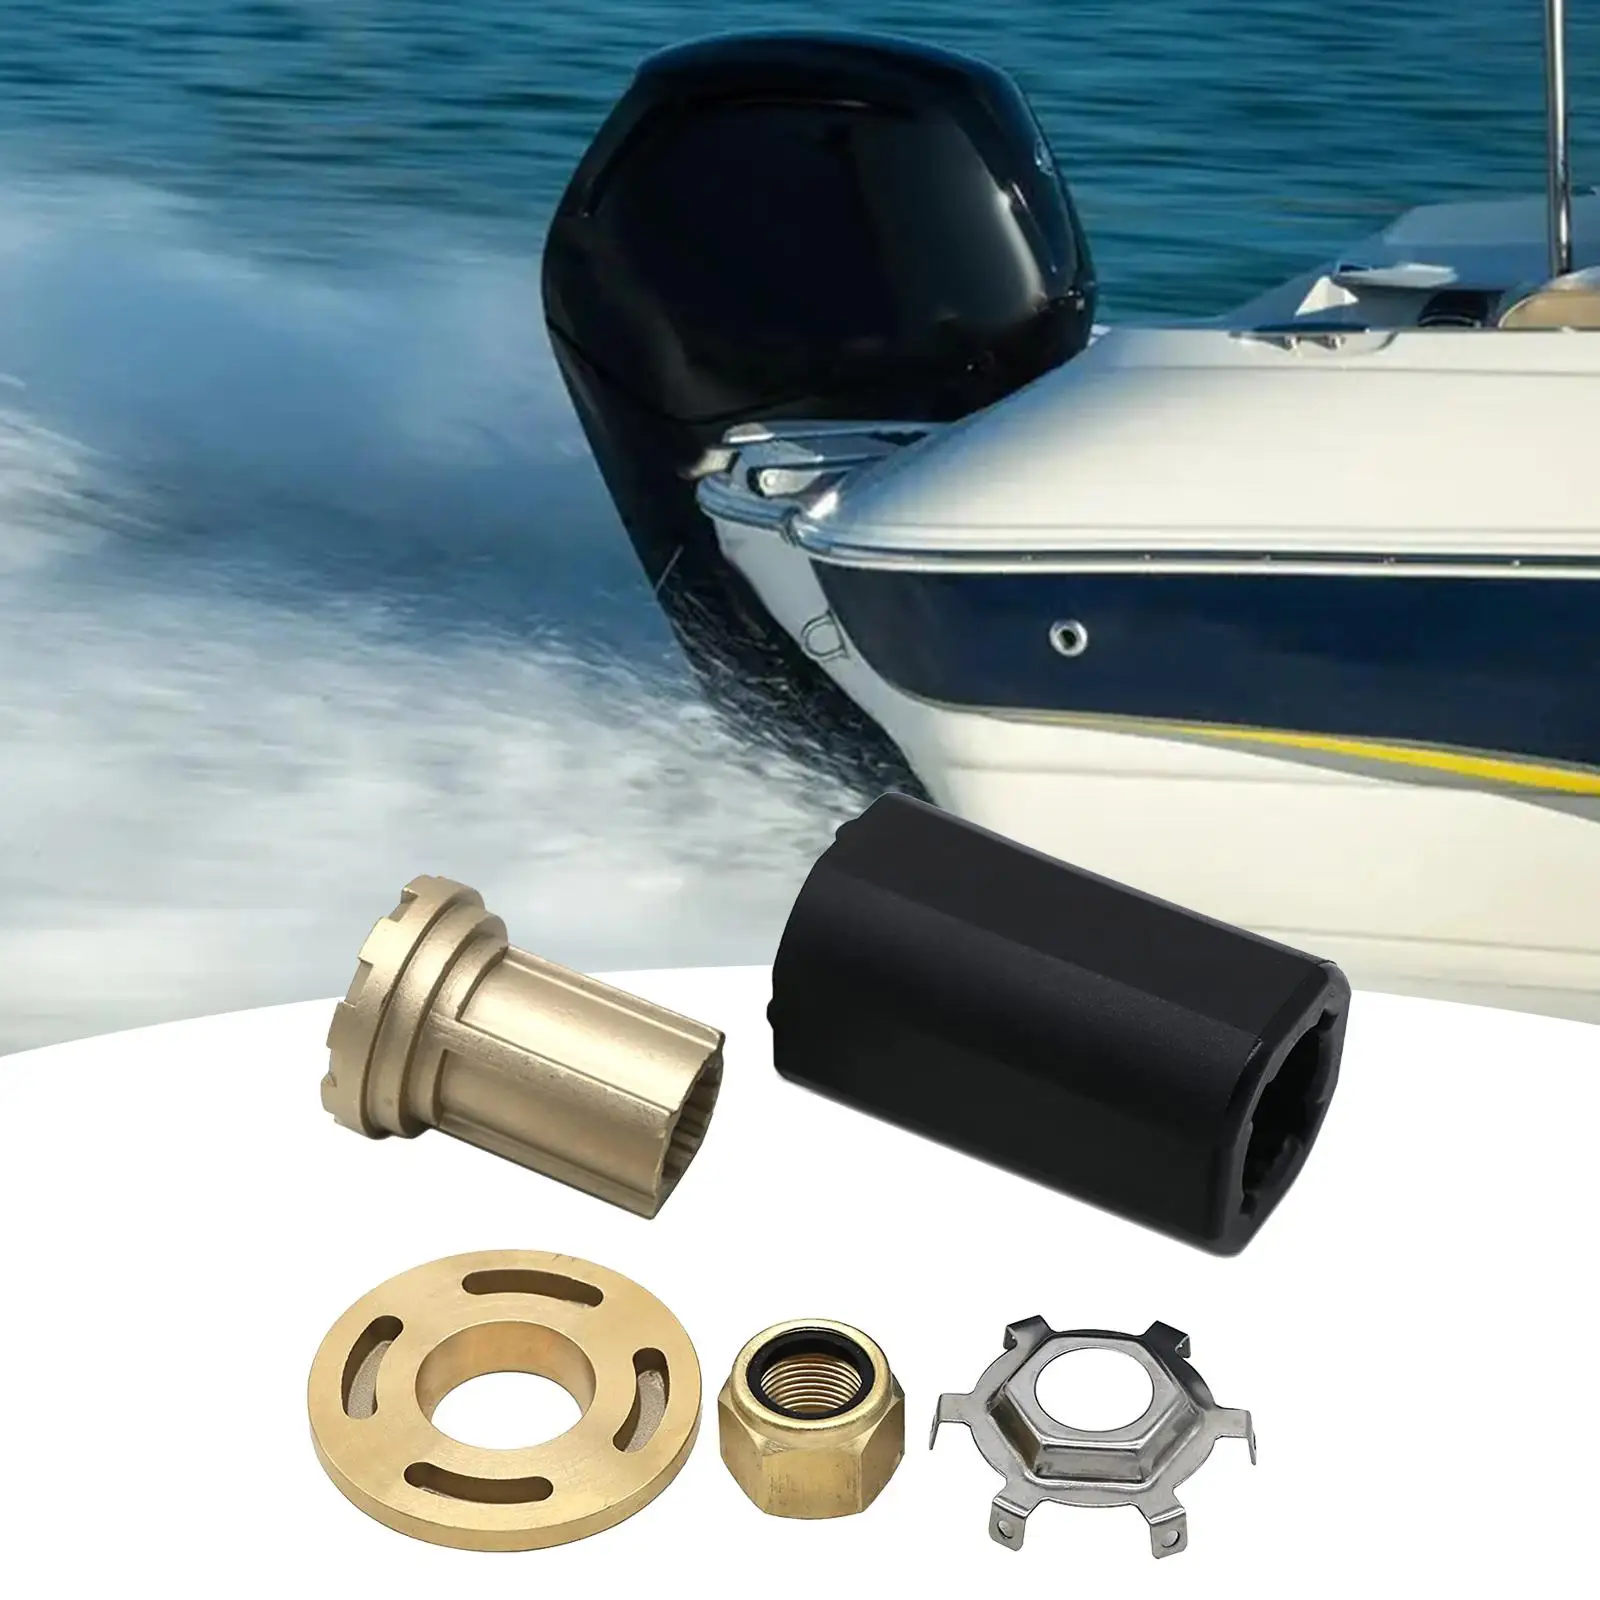 Hub Kit Outboard Engine Propeller for Mercury 40-60 HP ct Mariner